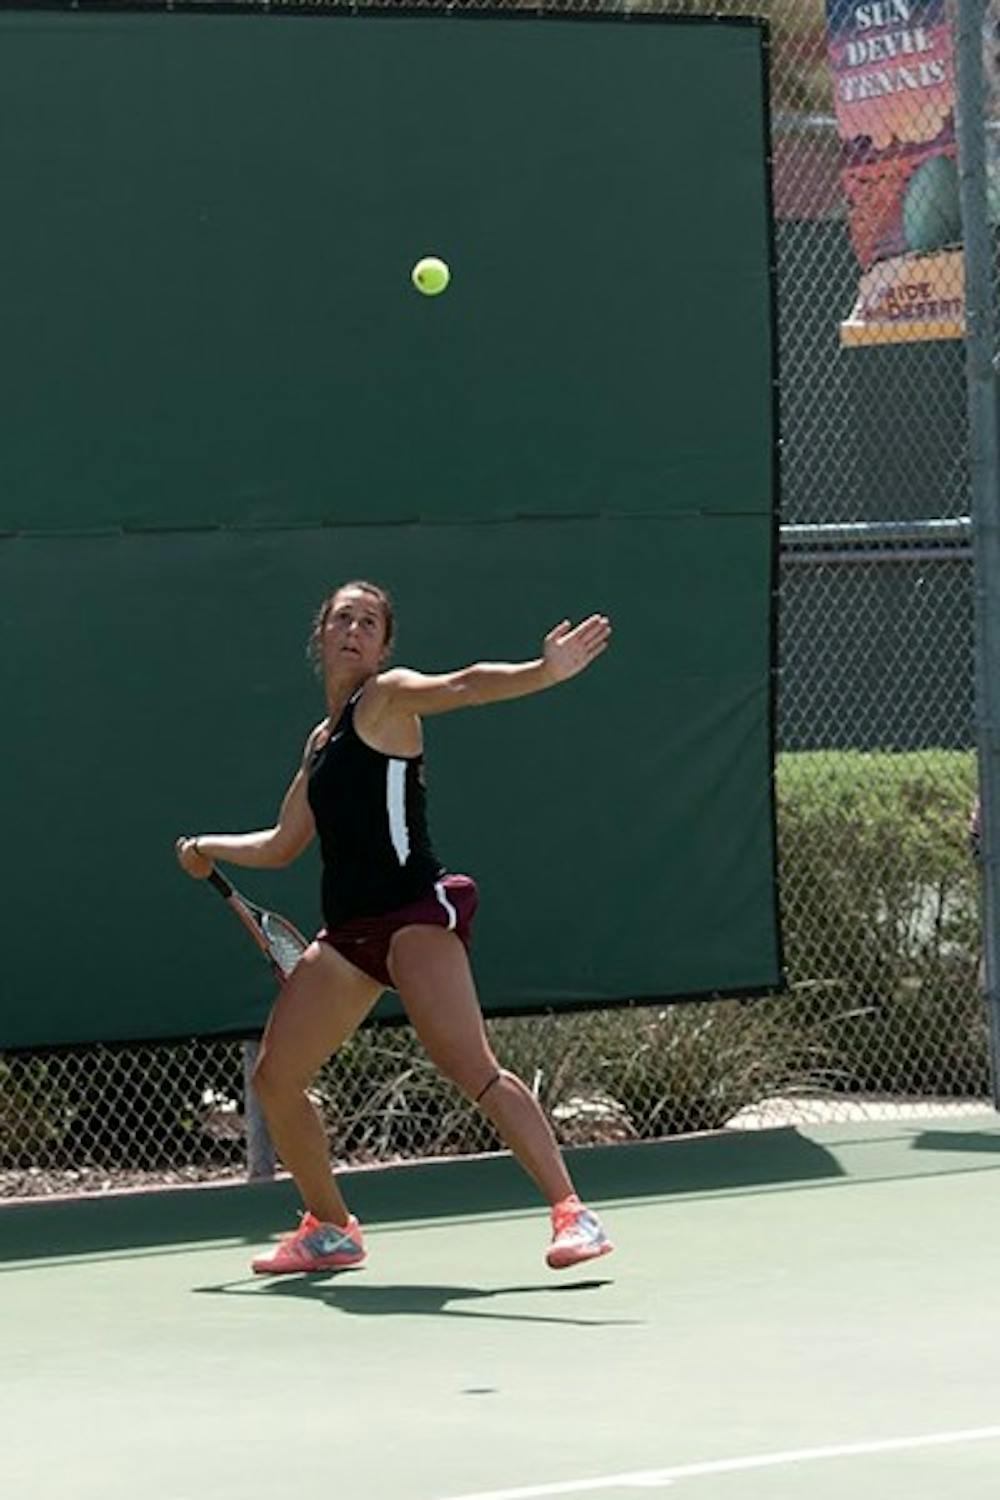 Stephanie Vlad volleys the ball over the net during a match against Cal’s Klara Fabikova on Sunday, November 10, 2013. Vlad finished third at this years, ASU Thunderbird Invitational at the Whiteman Tennis Center. (Photo by Murphy Bannerman)